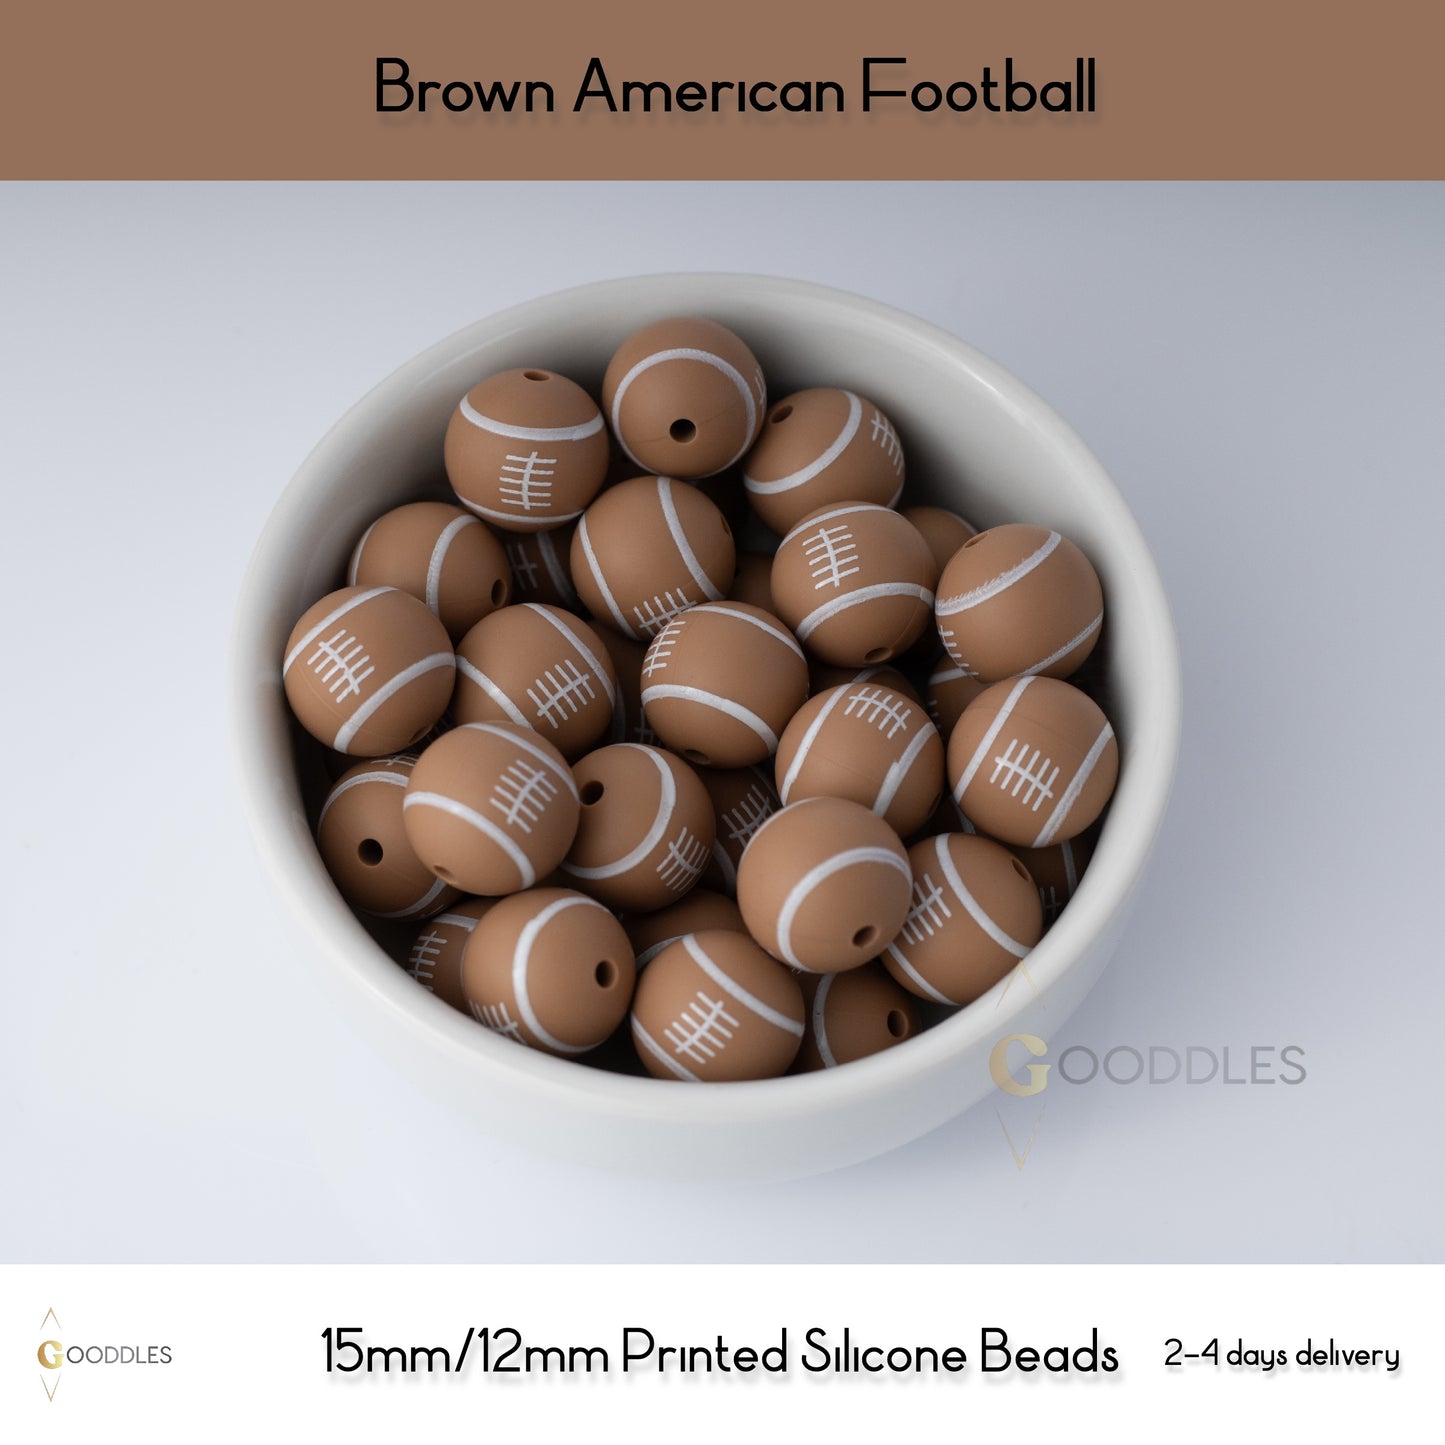 5pcs, Brown American Football Silicone Beads Printed Round Silicone Beads